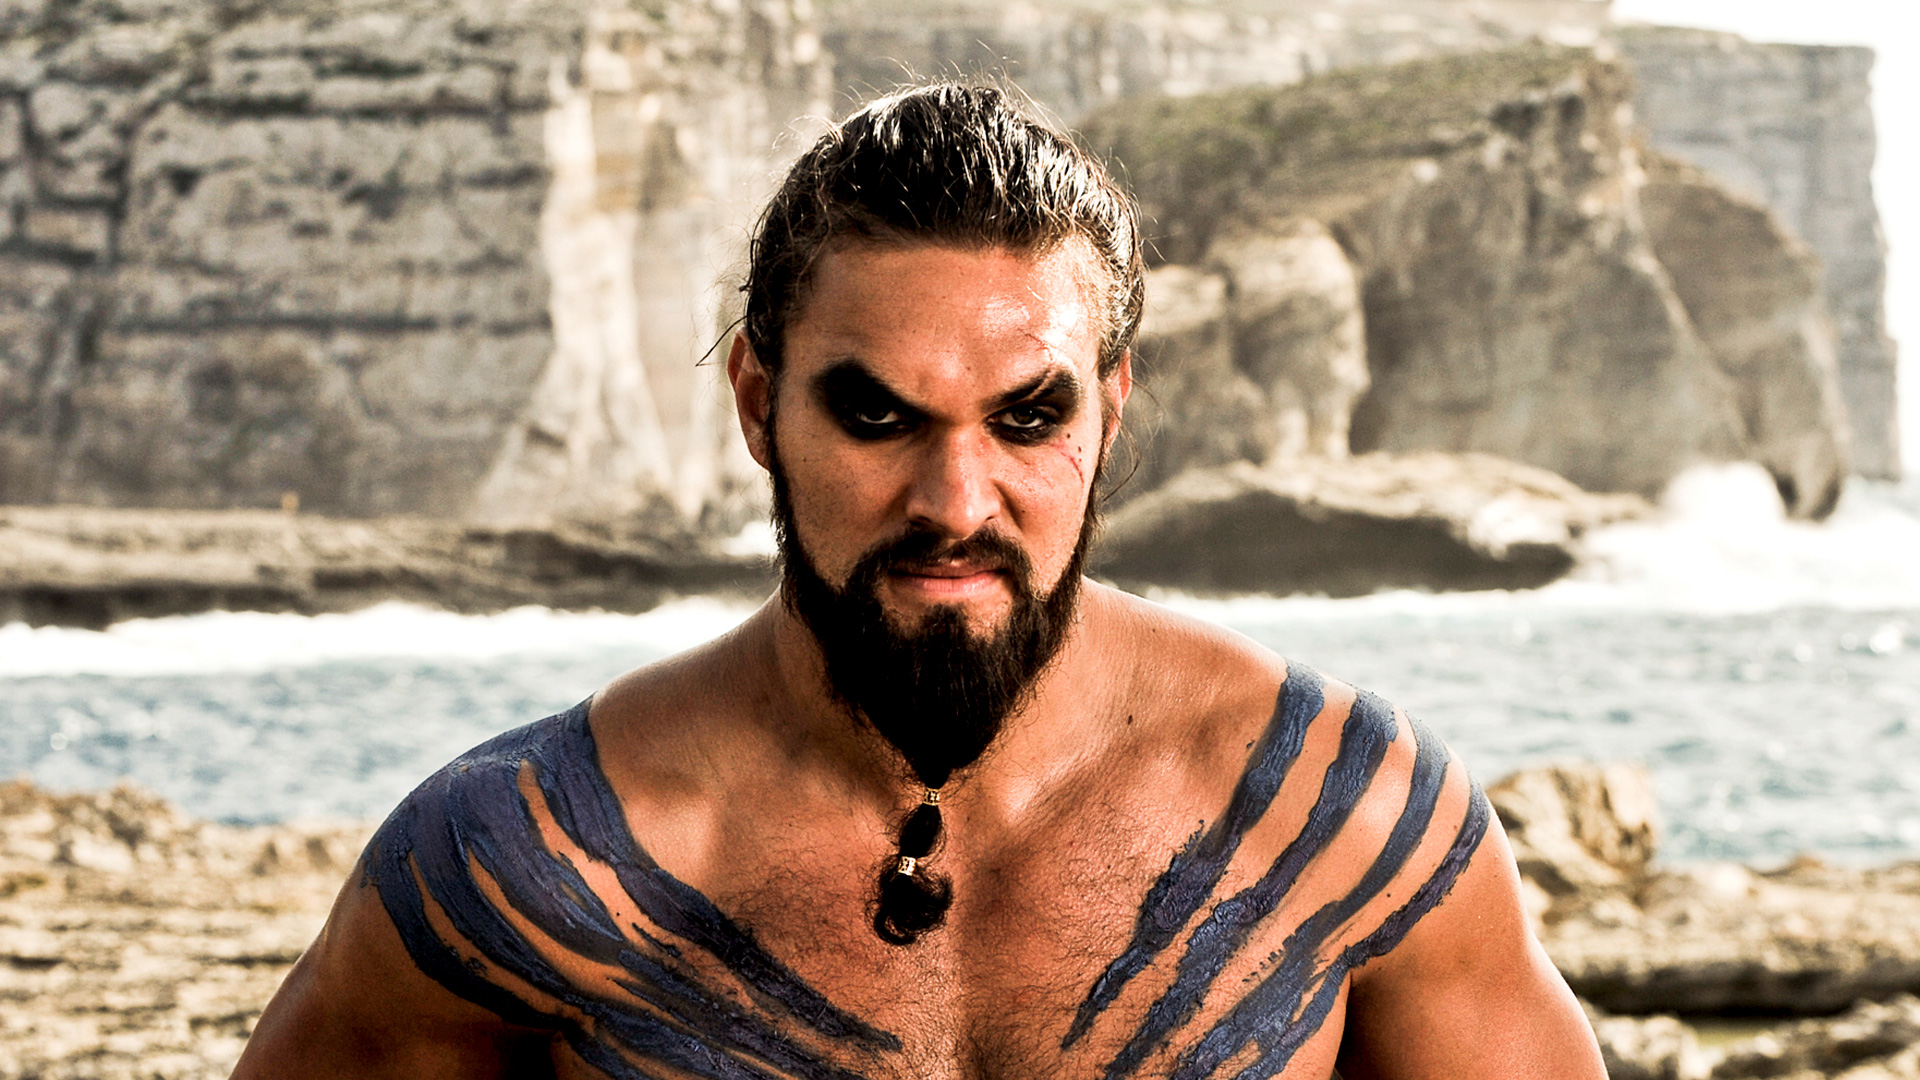 Jason Mamoa as Khal Drogo, a chieftain of the Dothraki people in HBO's "Game of Thrones." Photo courtesy of HBO